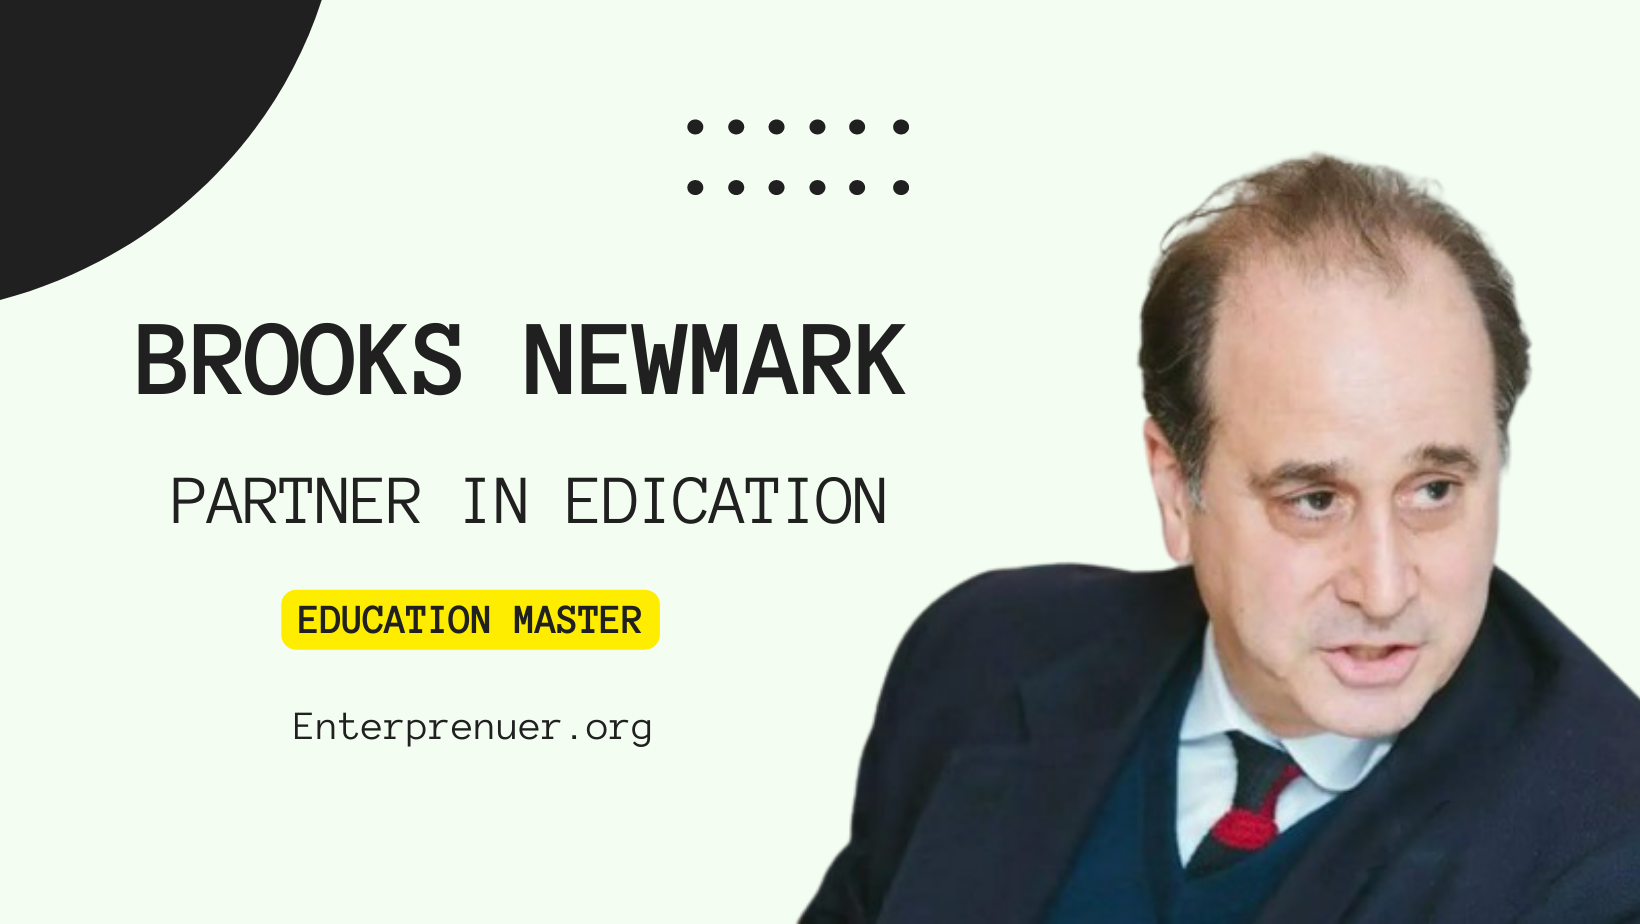 Meet Brooks Newmark Founder of A Partner in Education